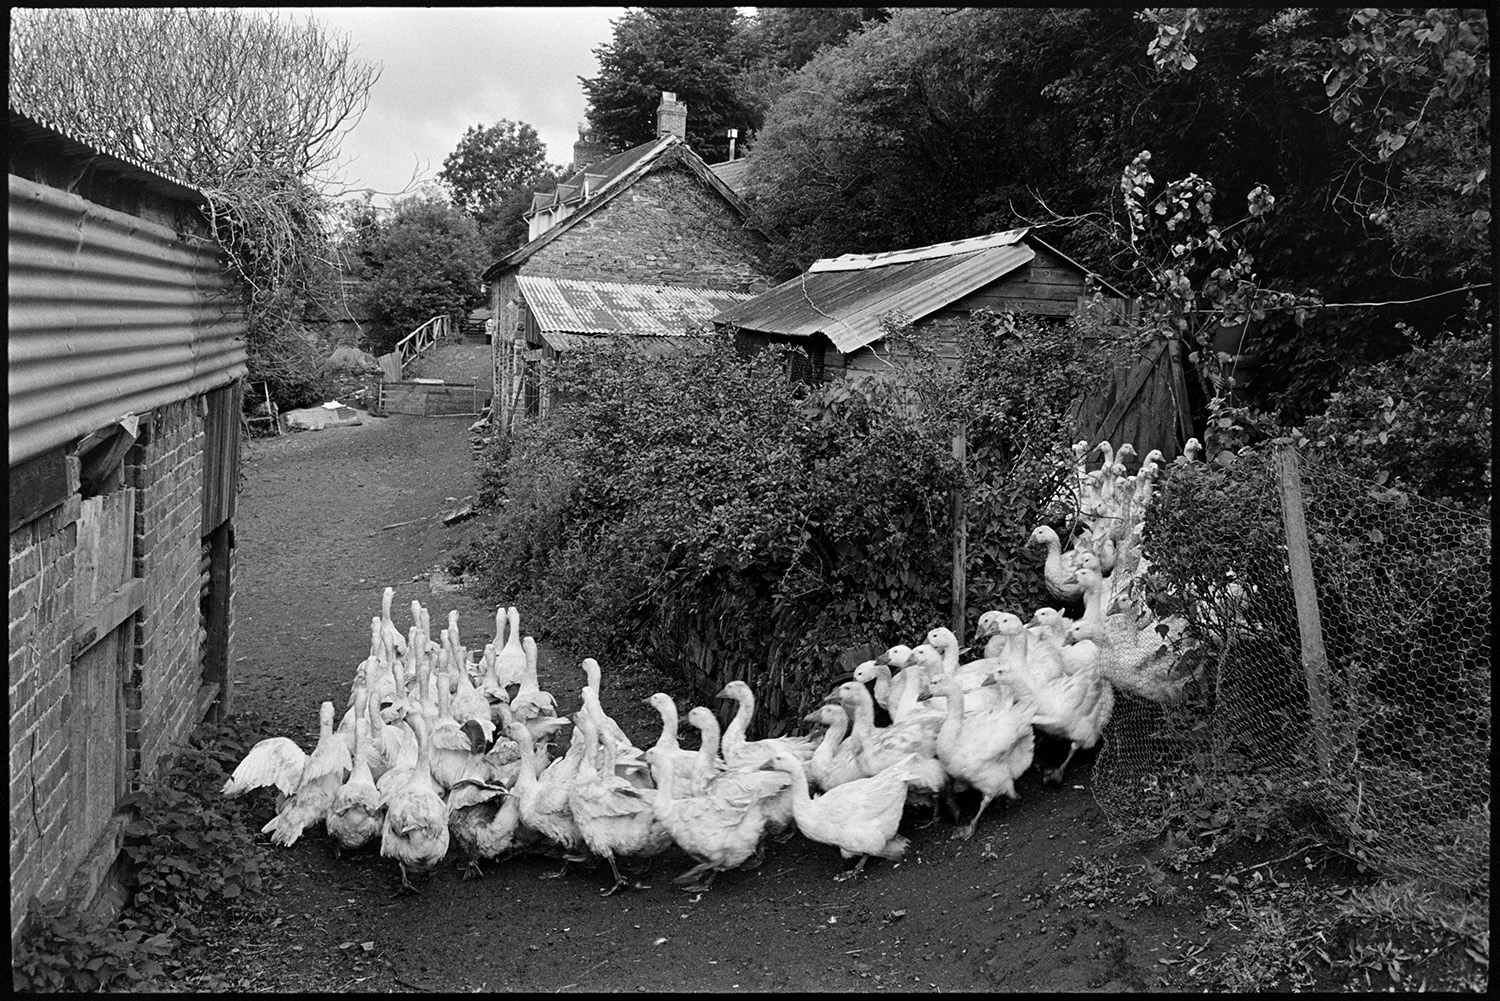 Geese in farmyard with barn, corrugated iron. 
[A large flock of geese walking along a pathway in a farmyard past sheds with corrugated iron roofs, at Indiwell, Swimbridge.]